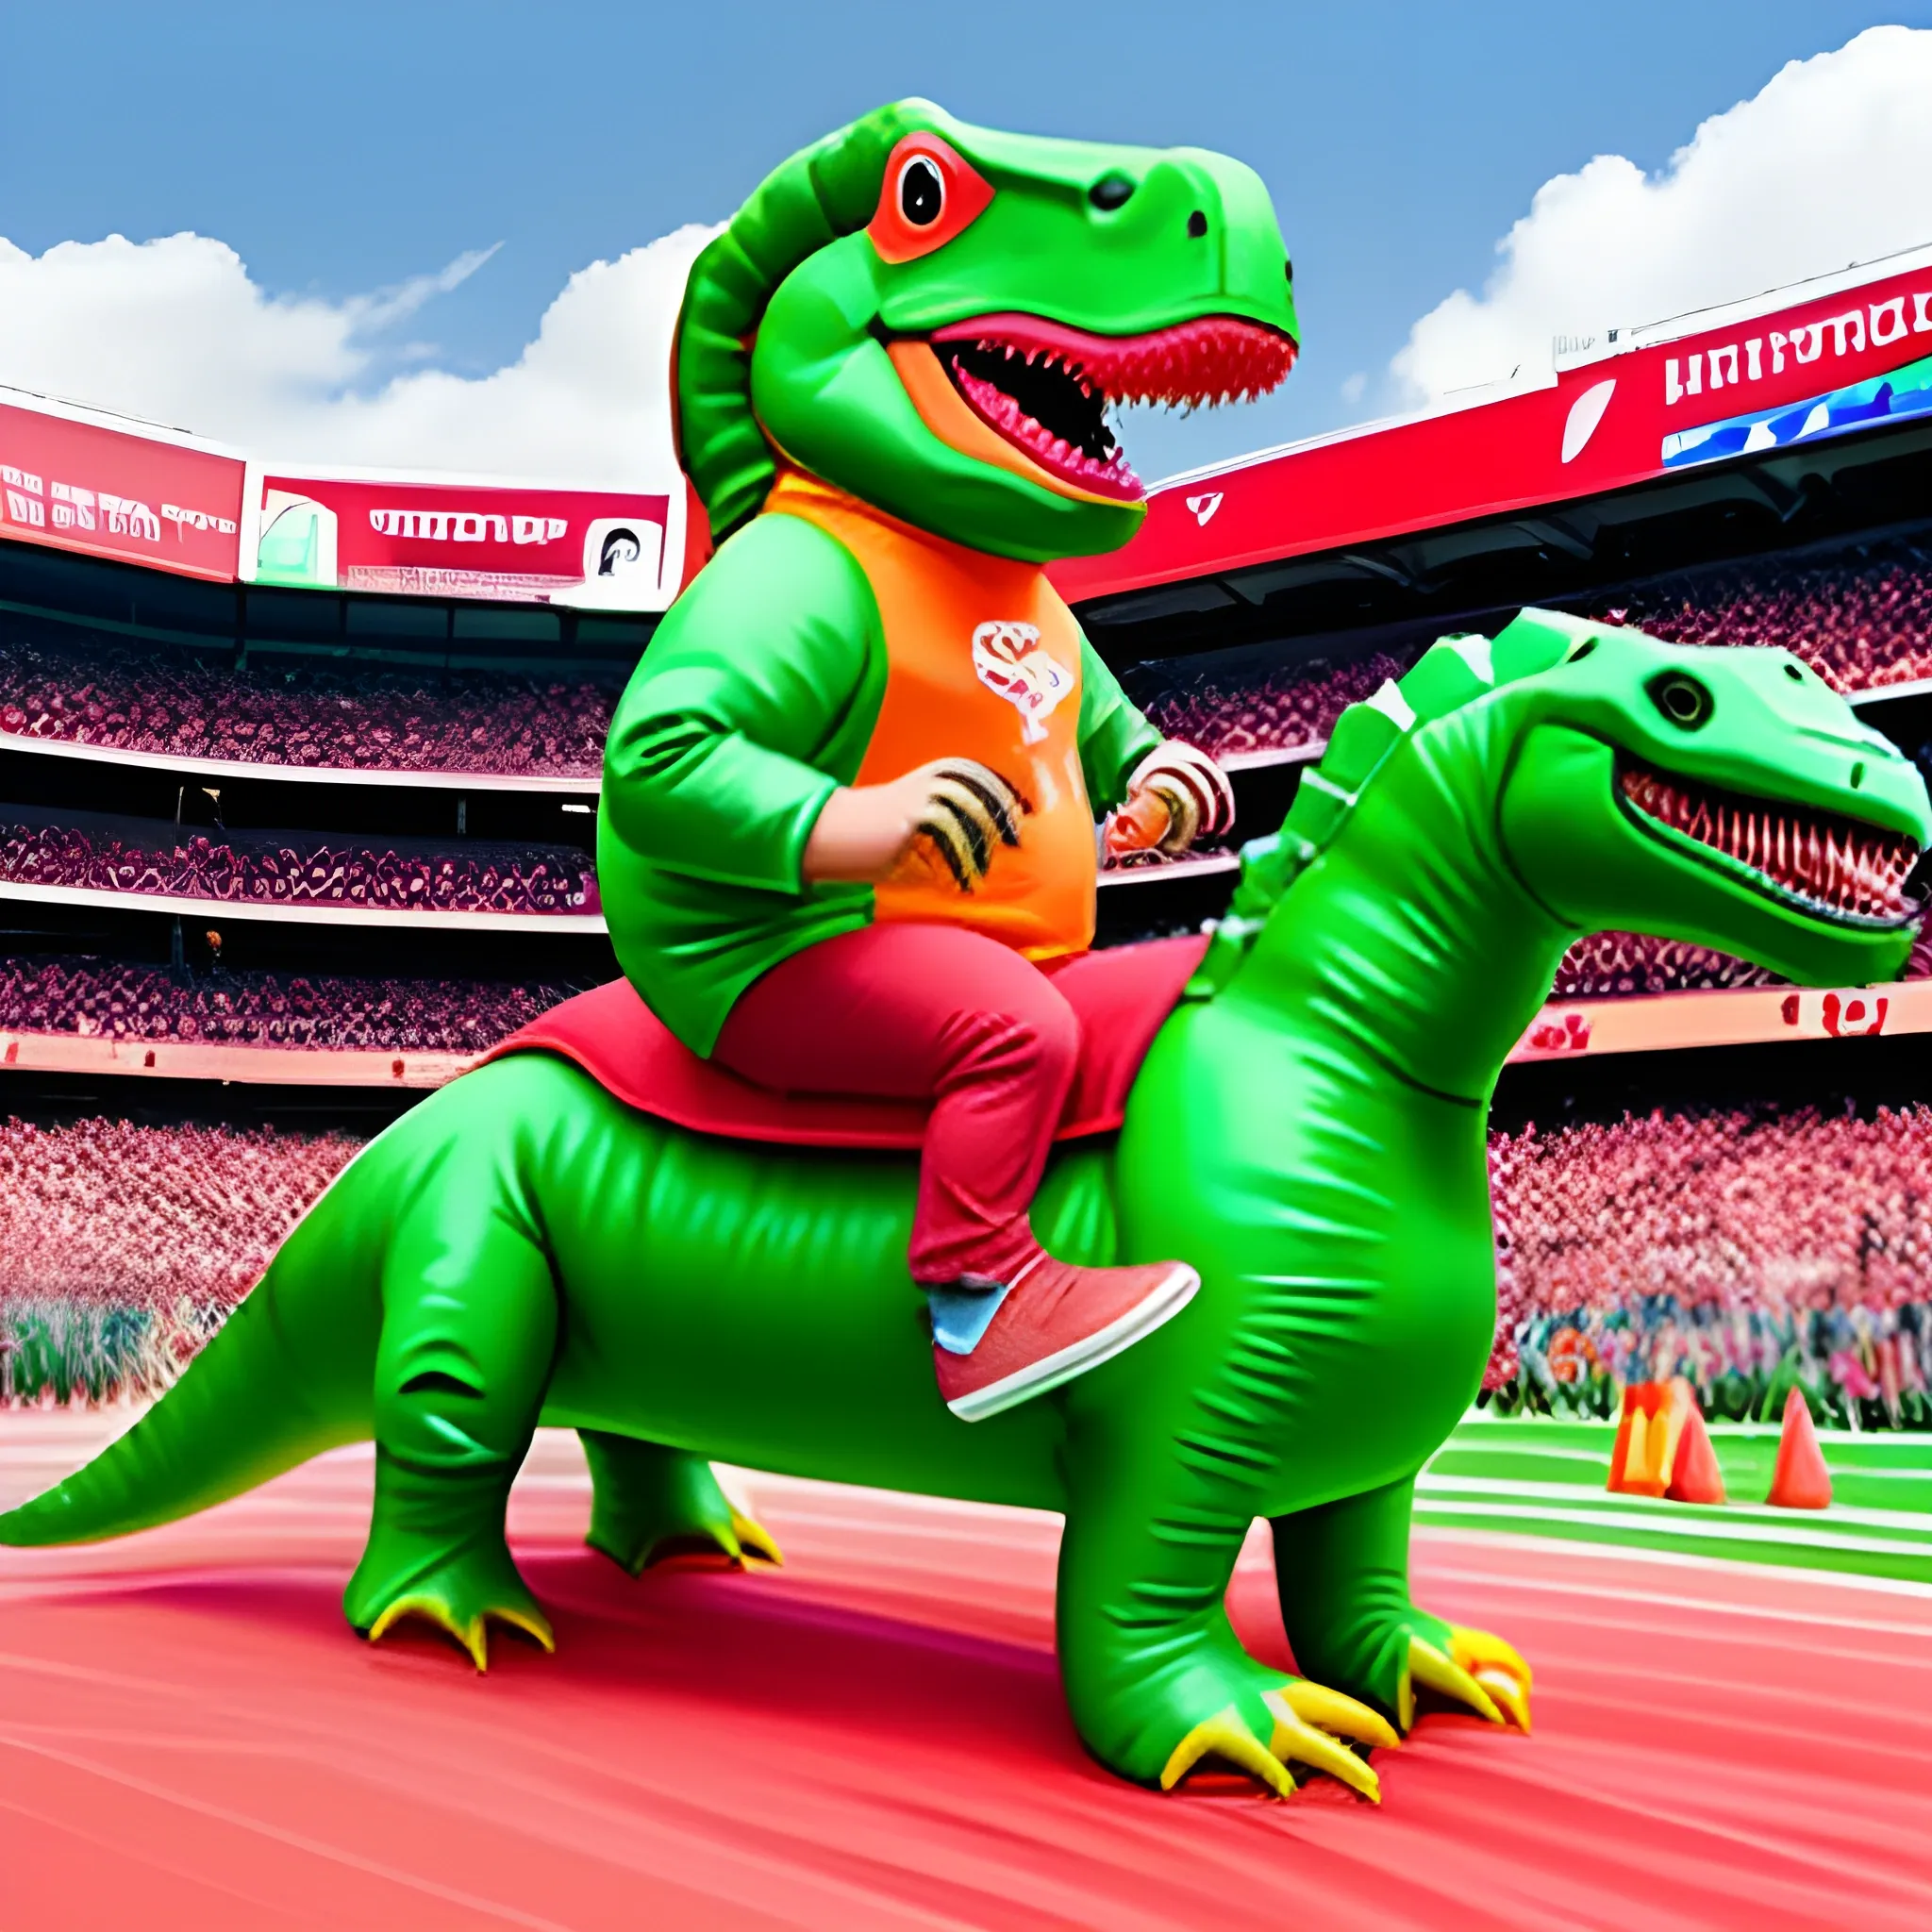 Hyper realistic baker mayfield riding a dinosaur wearing an inflatable dinosaur costume